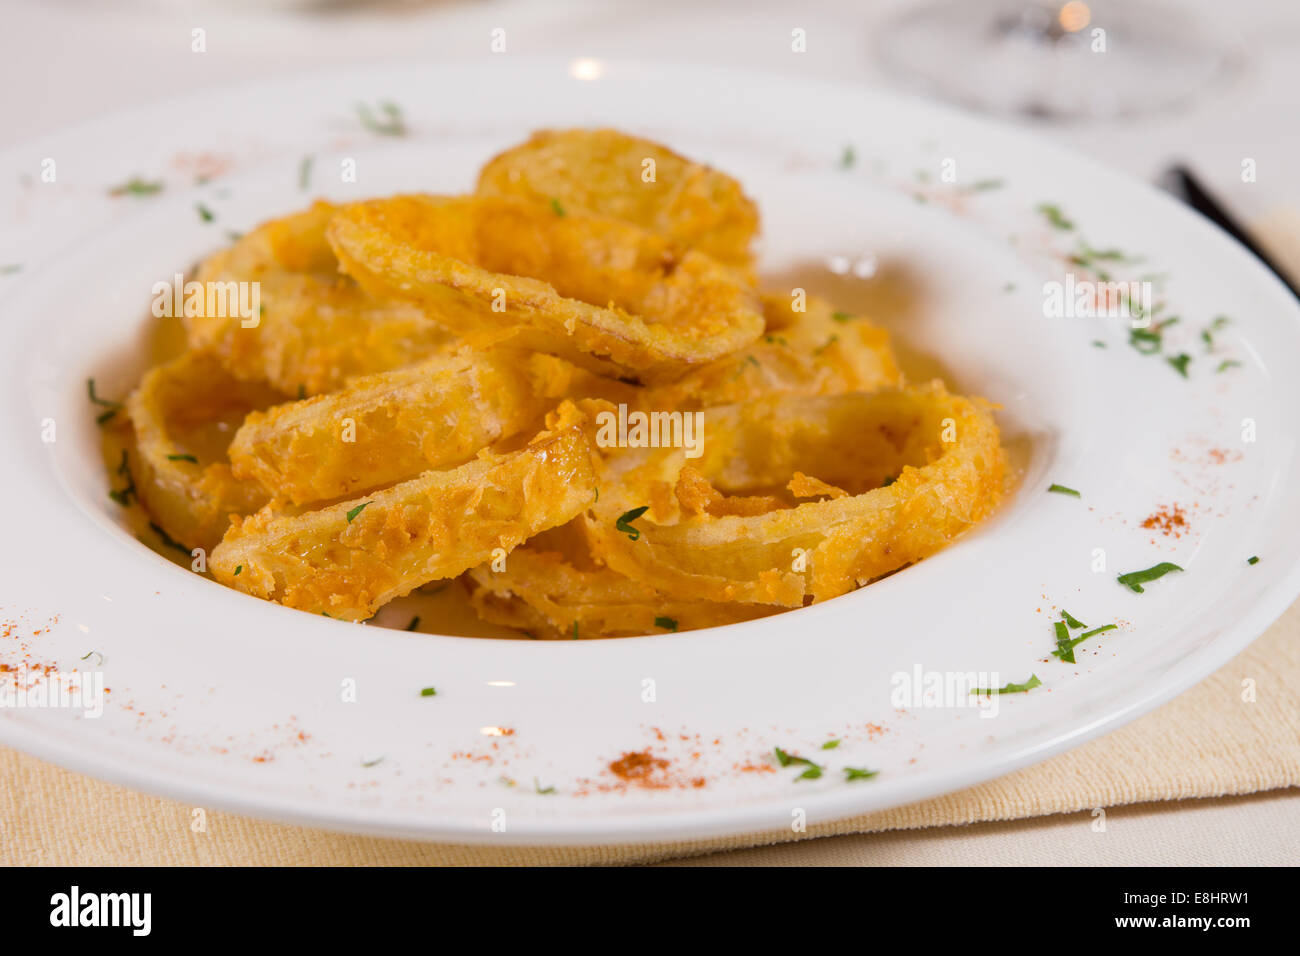 Close up Tasty Fried Onion Rings on White Plate Served on Table. Stock Photo